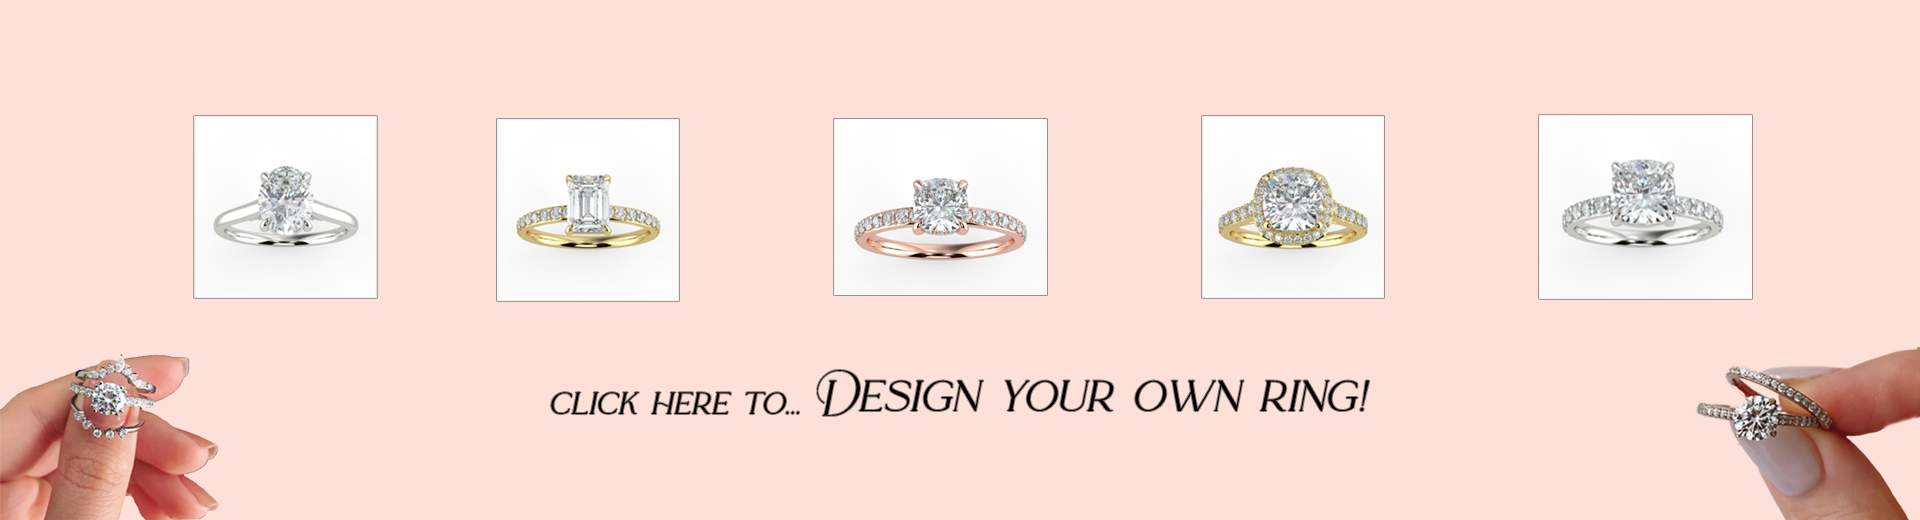 Design Your Own Ring